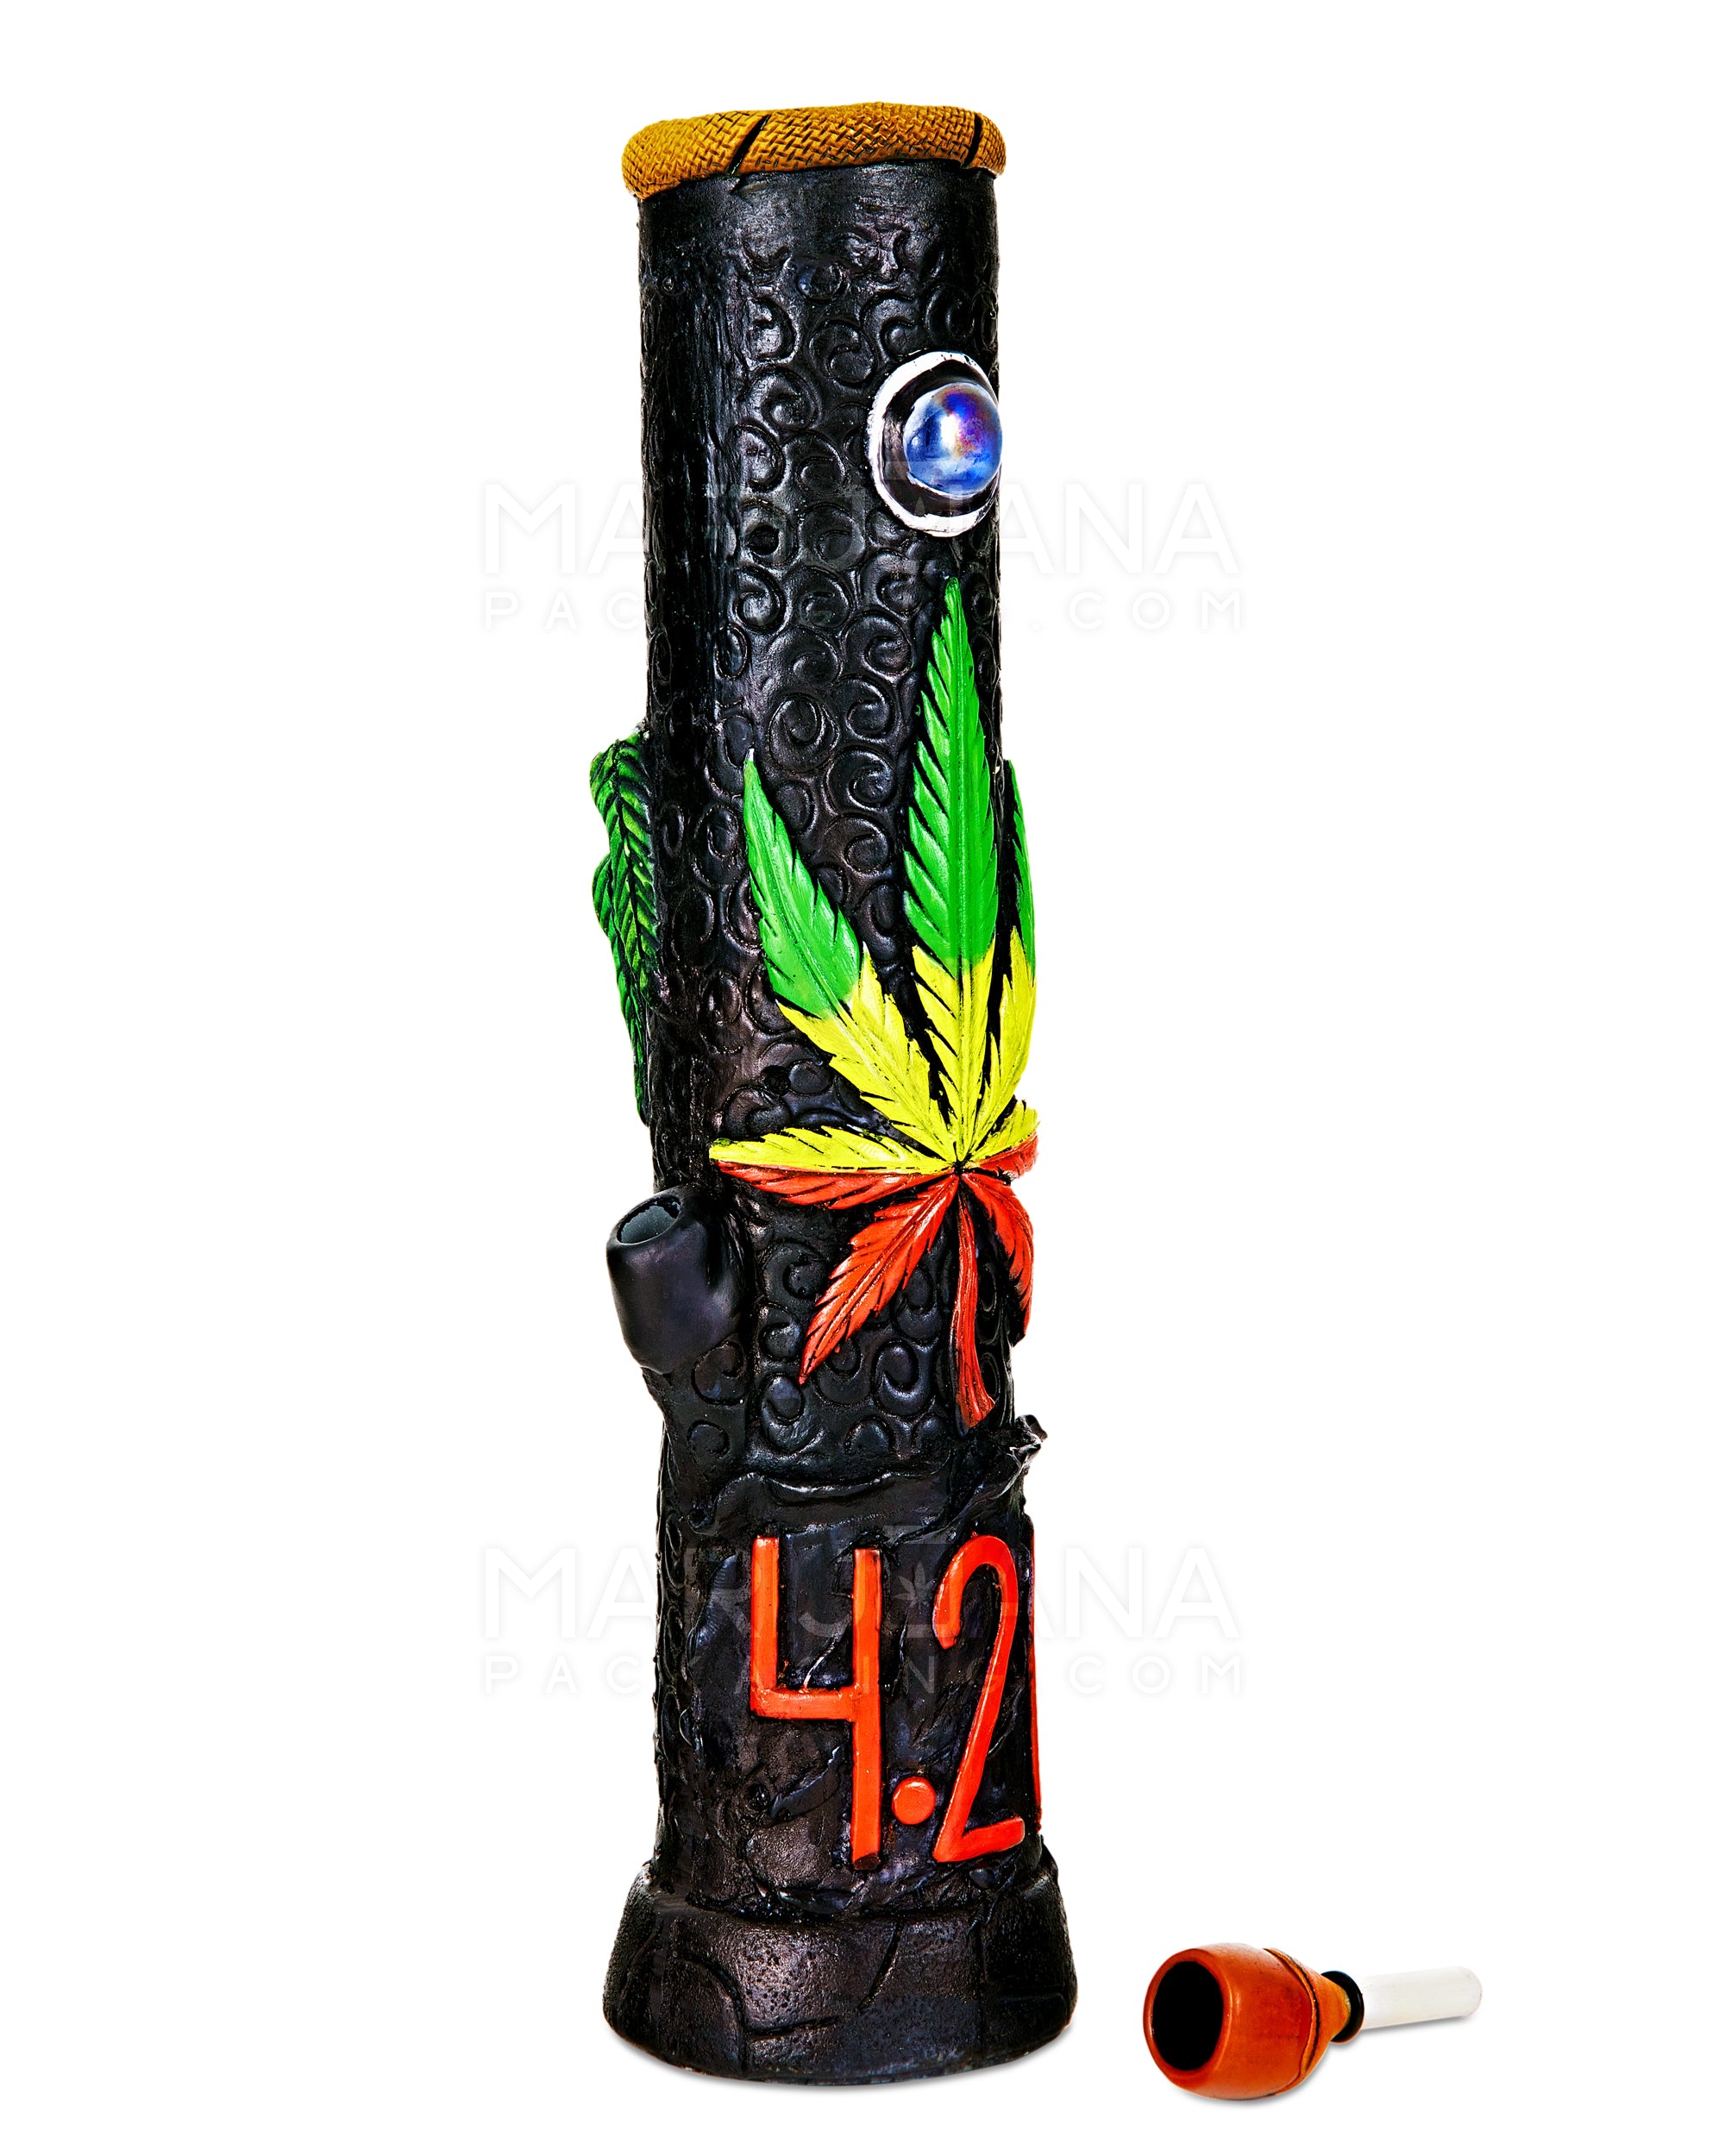 Straight Neck 420 Rasta Leaf Painted Wood Water Pipe w/ Iridescent Marble | 12in Tall - Wood Bowl - Rasta - 2